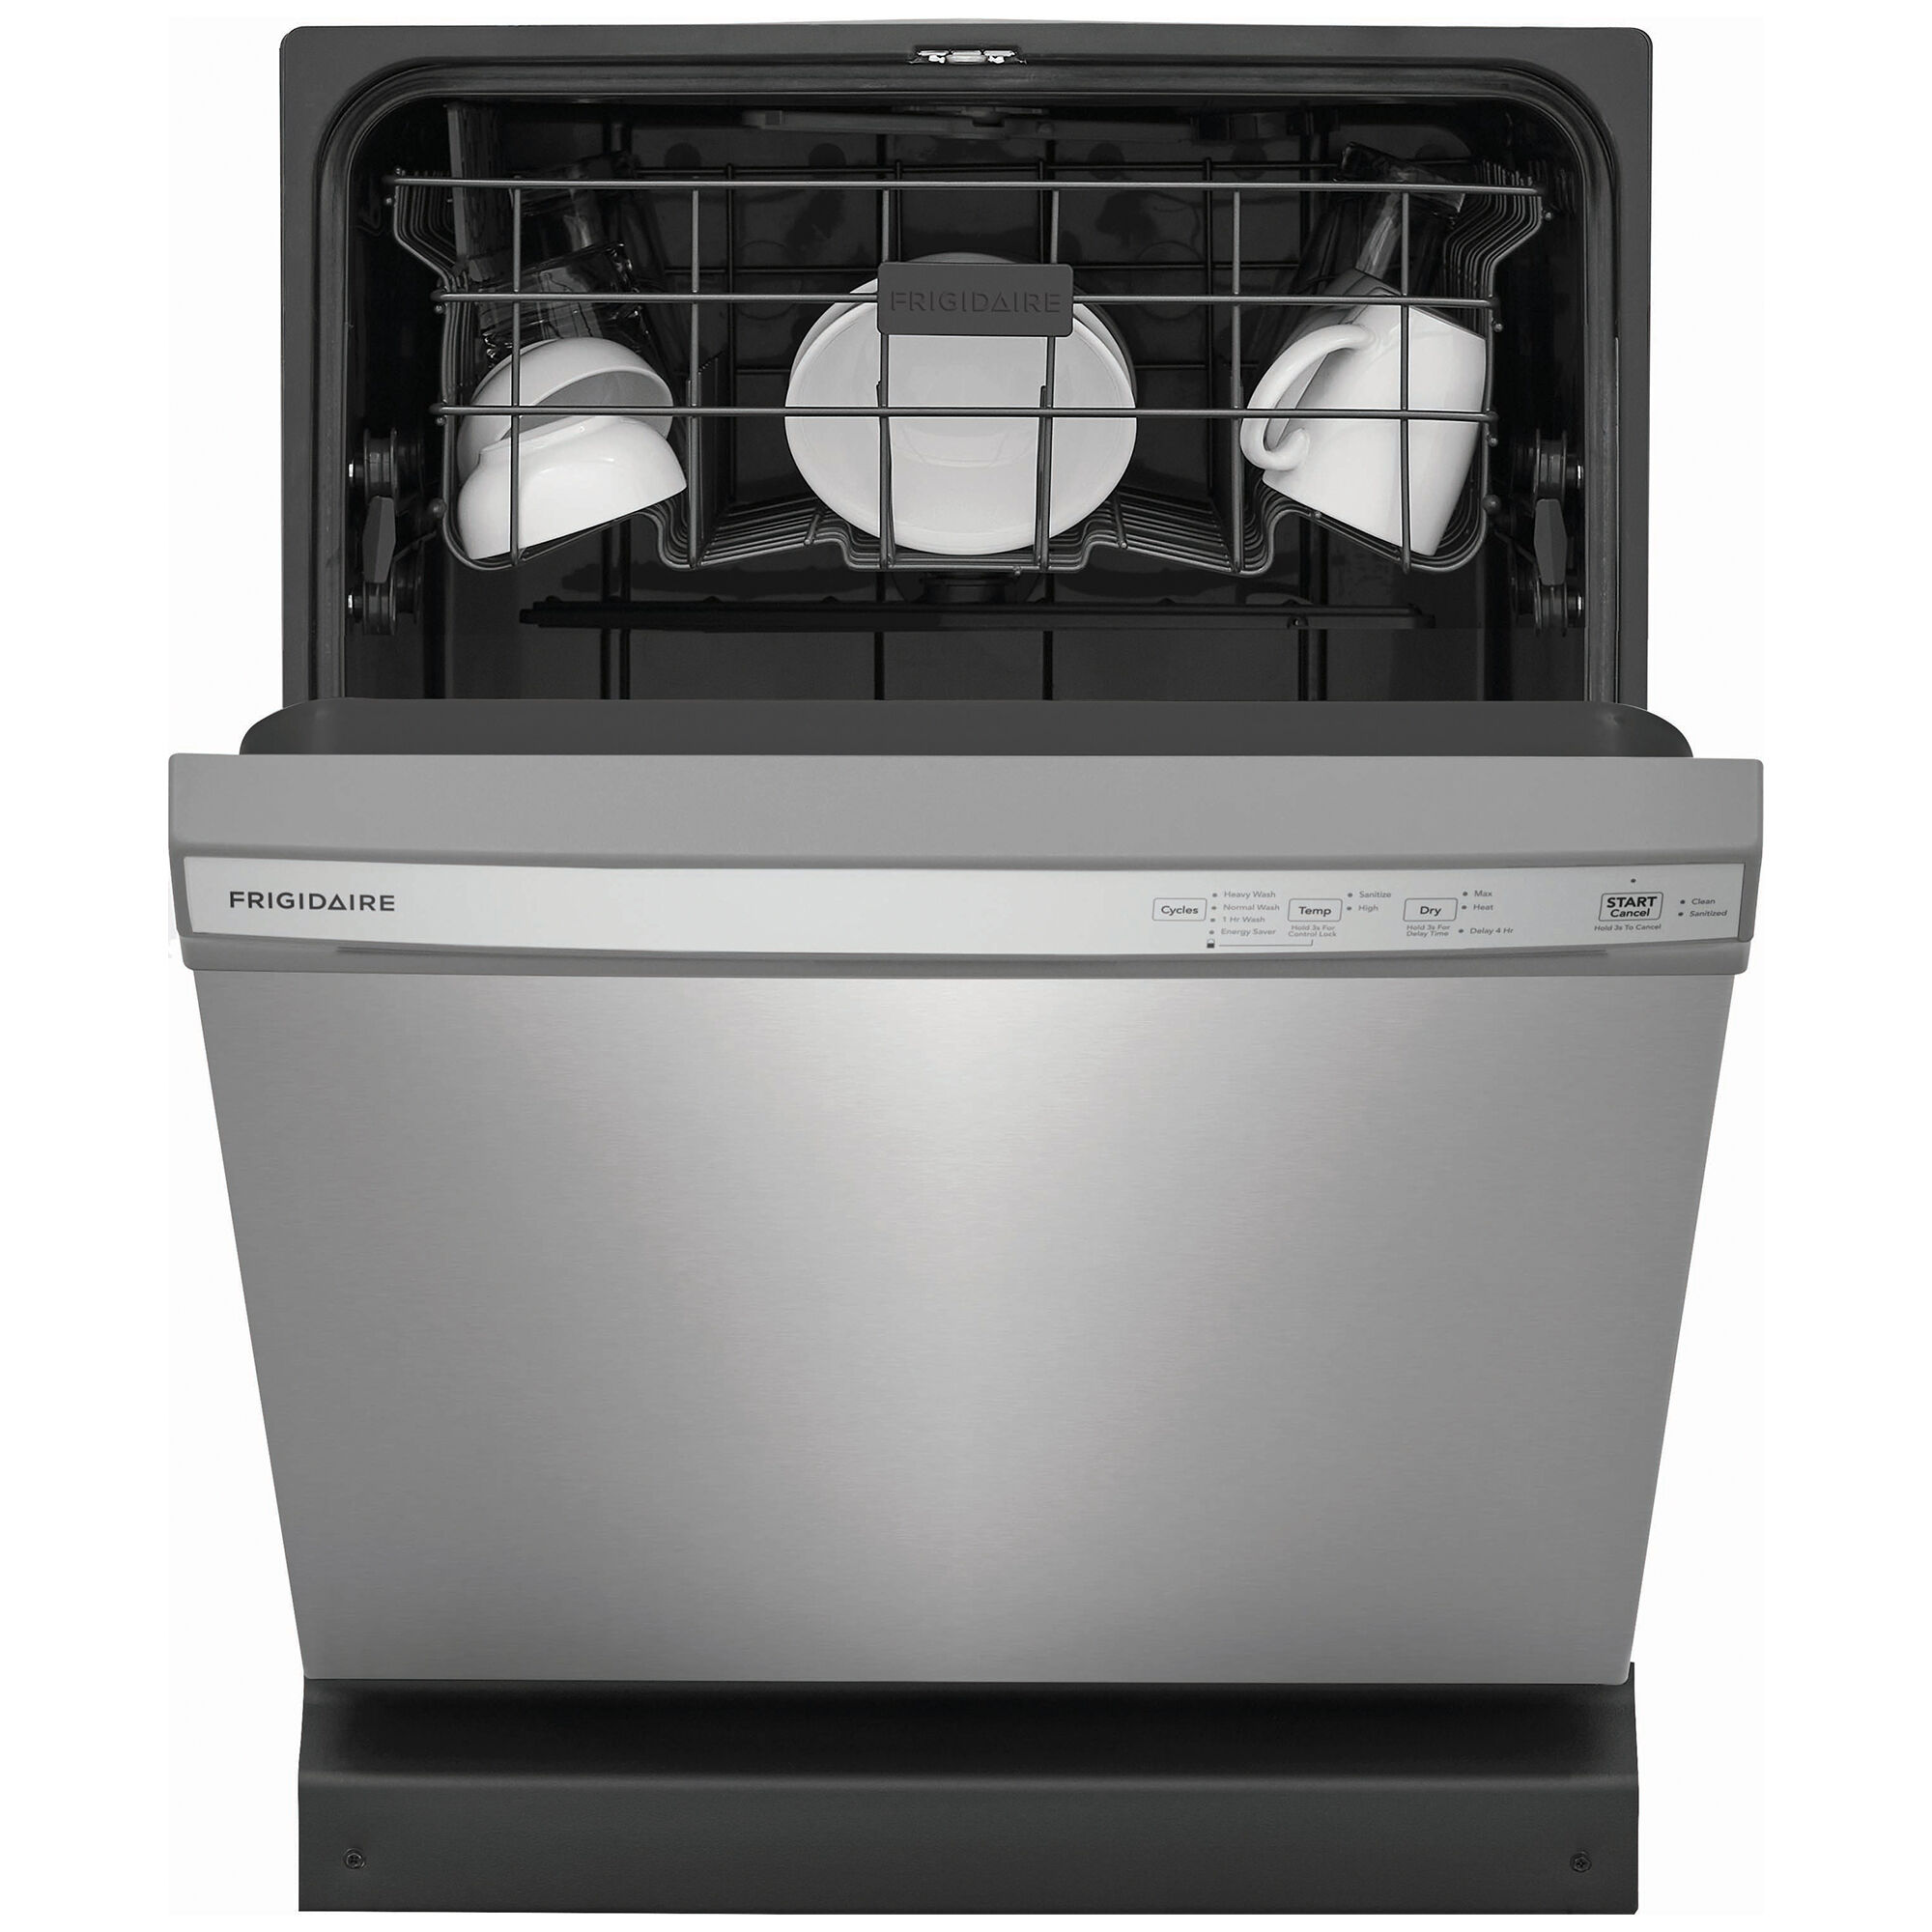 Frigidaire 24 in. Built-In Dishwasher with Front Control, 54 dBA Sound  Level, 14 Place Settings, 4 Wash Cycles & Sanitize Cycle - Stainless Steel